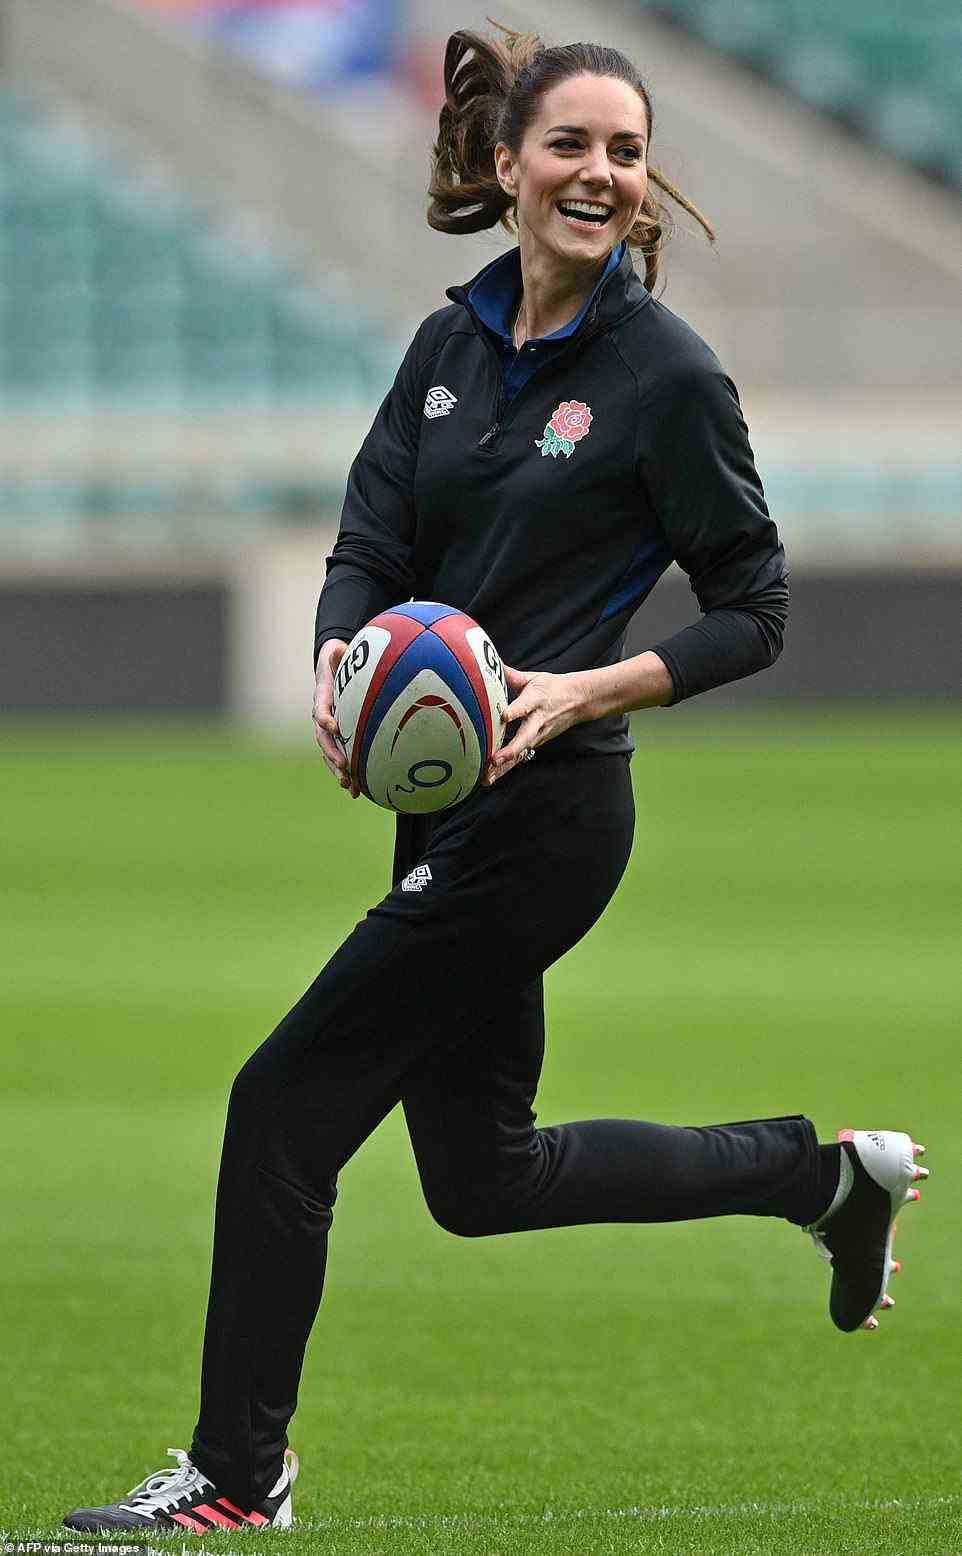 In her element! The Duchess, dressed head-to-toe in England Rugby kit, beamed as she joined players for a training session